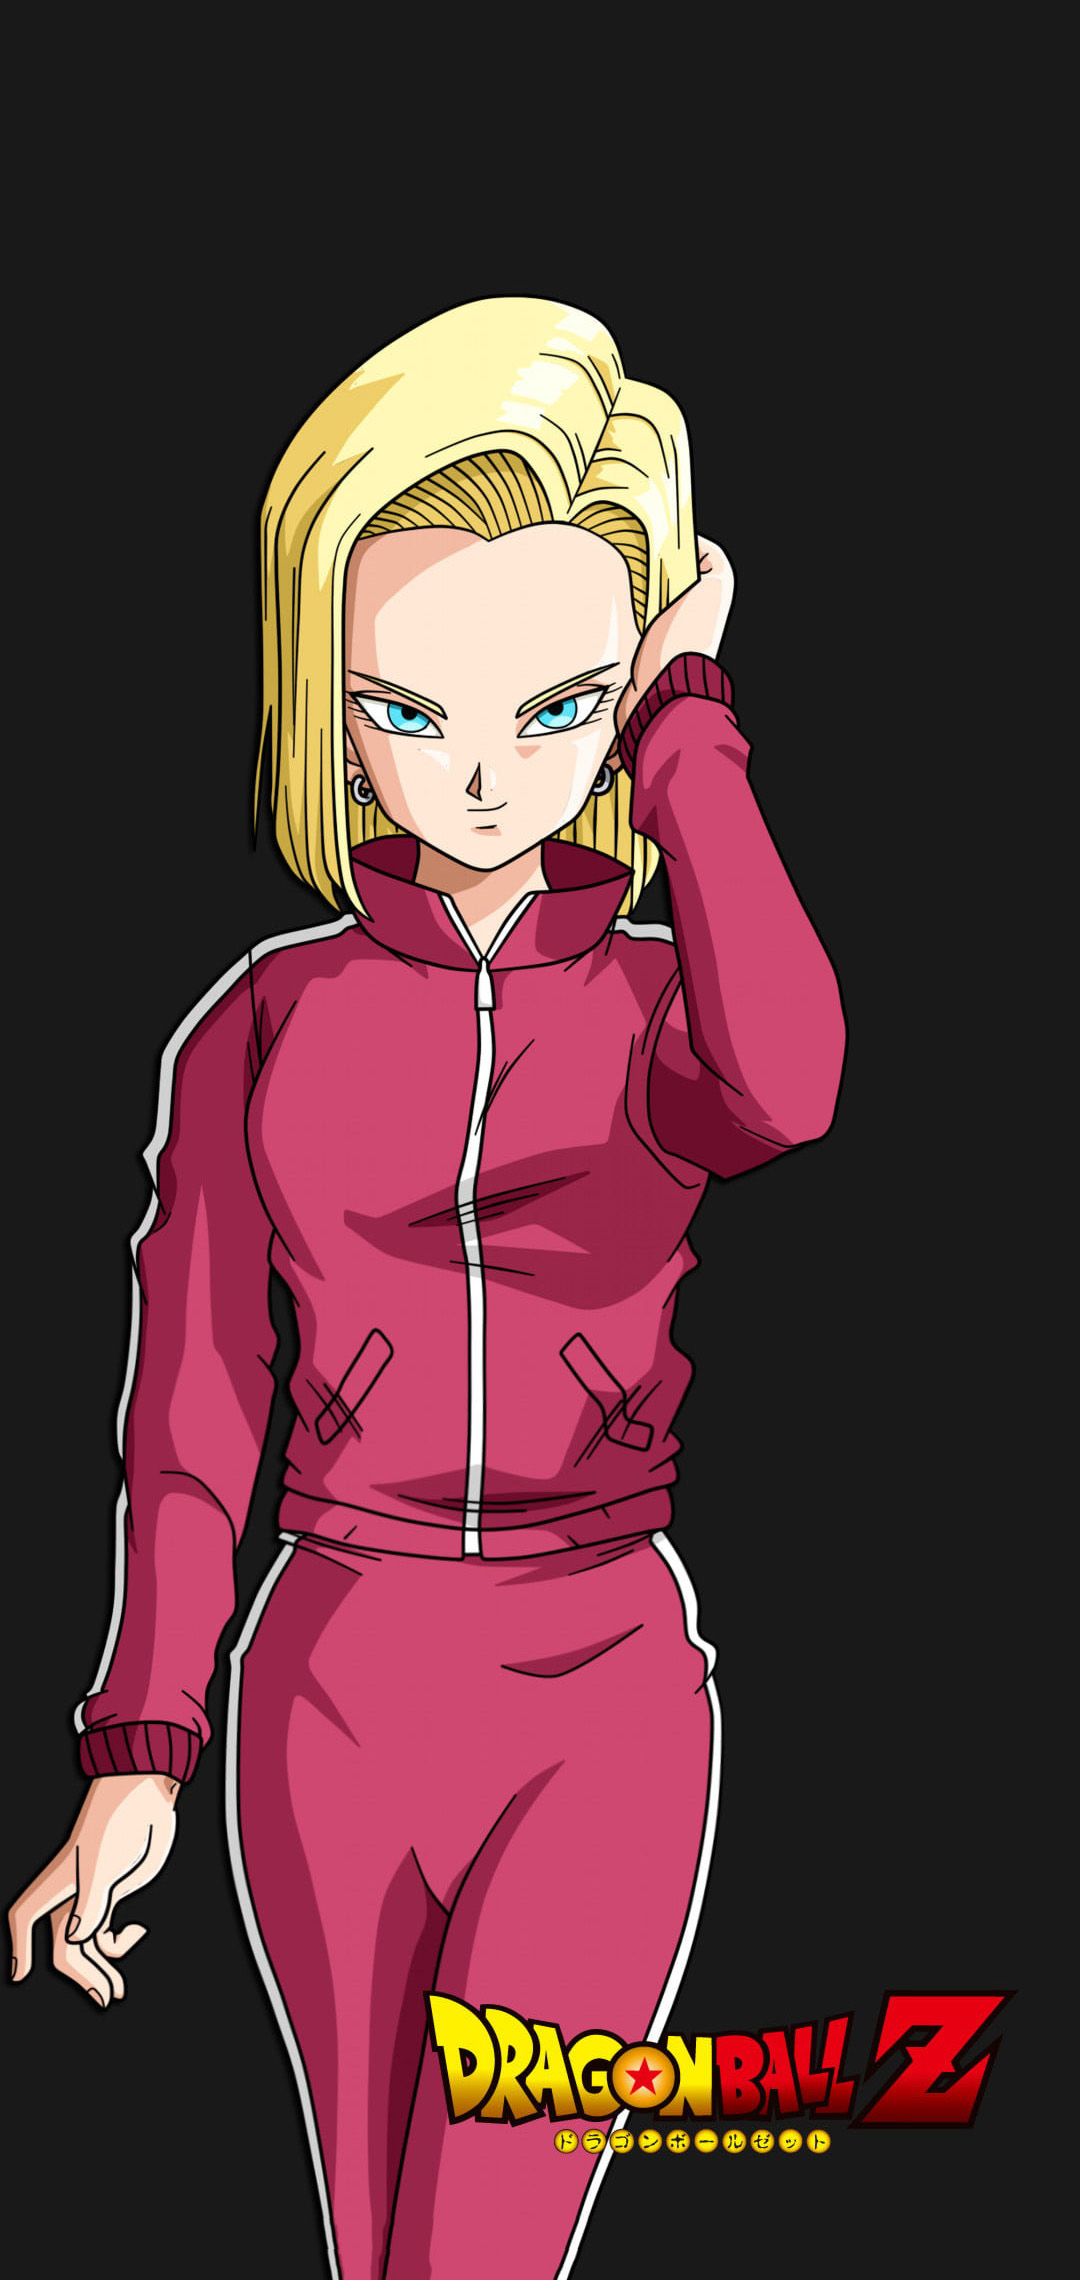 Android 18 Wallpapers - TubeWP